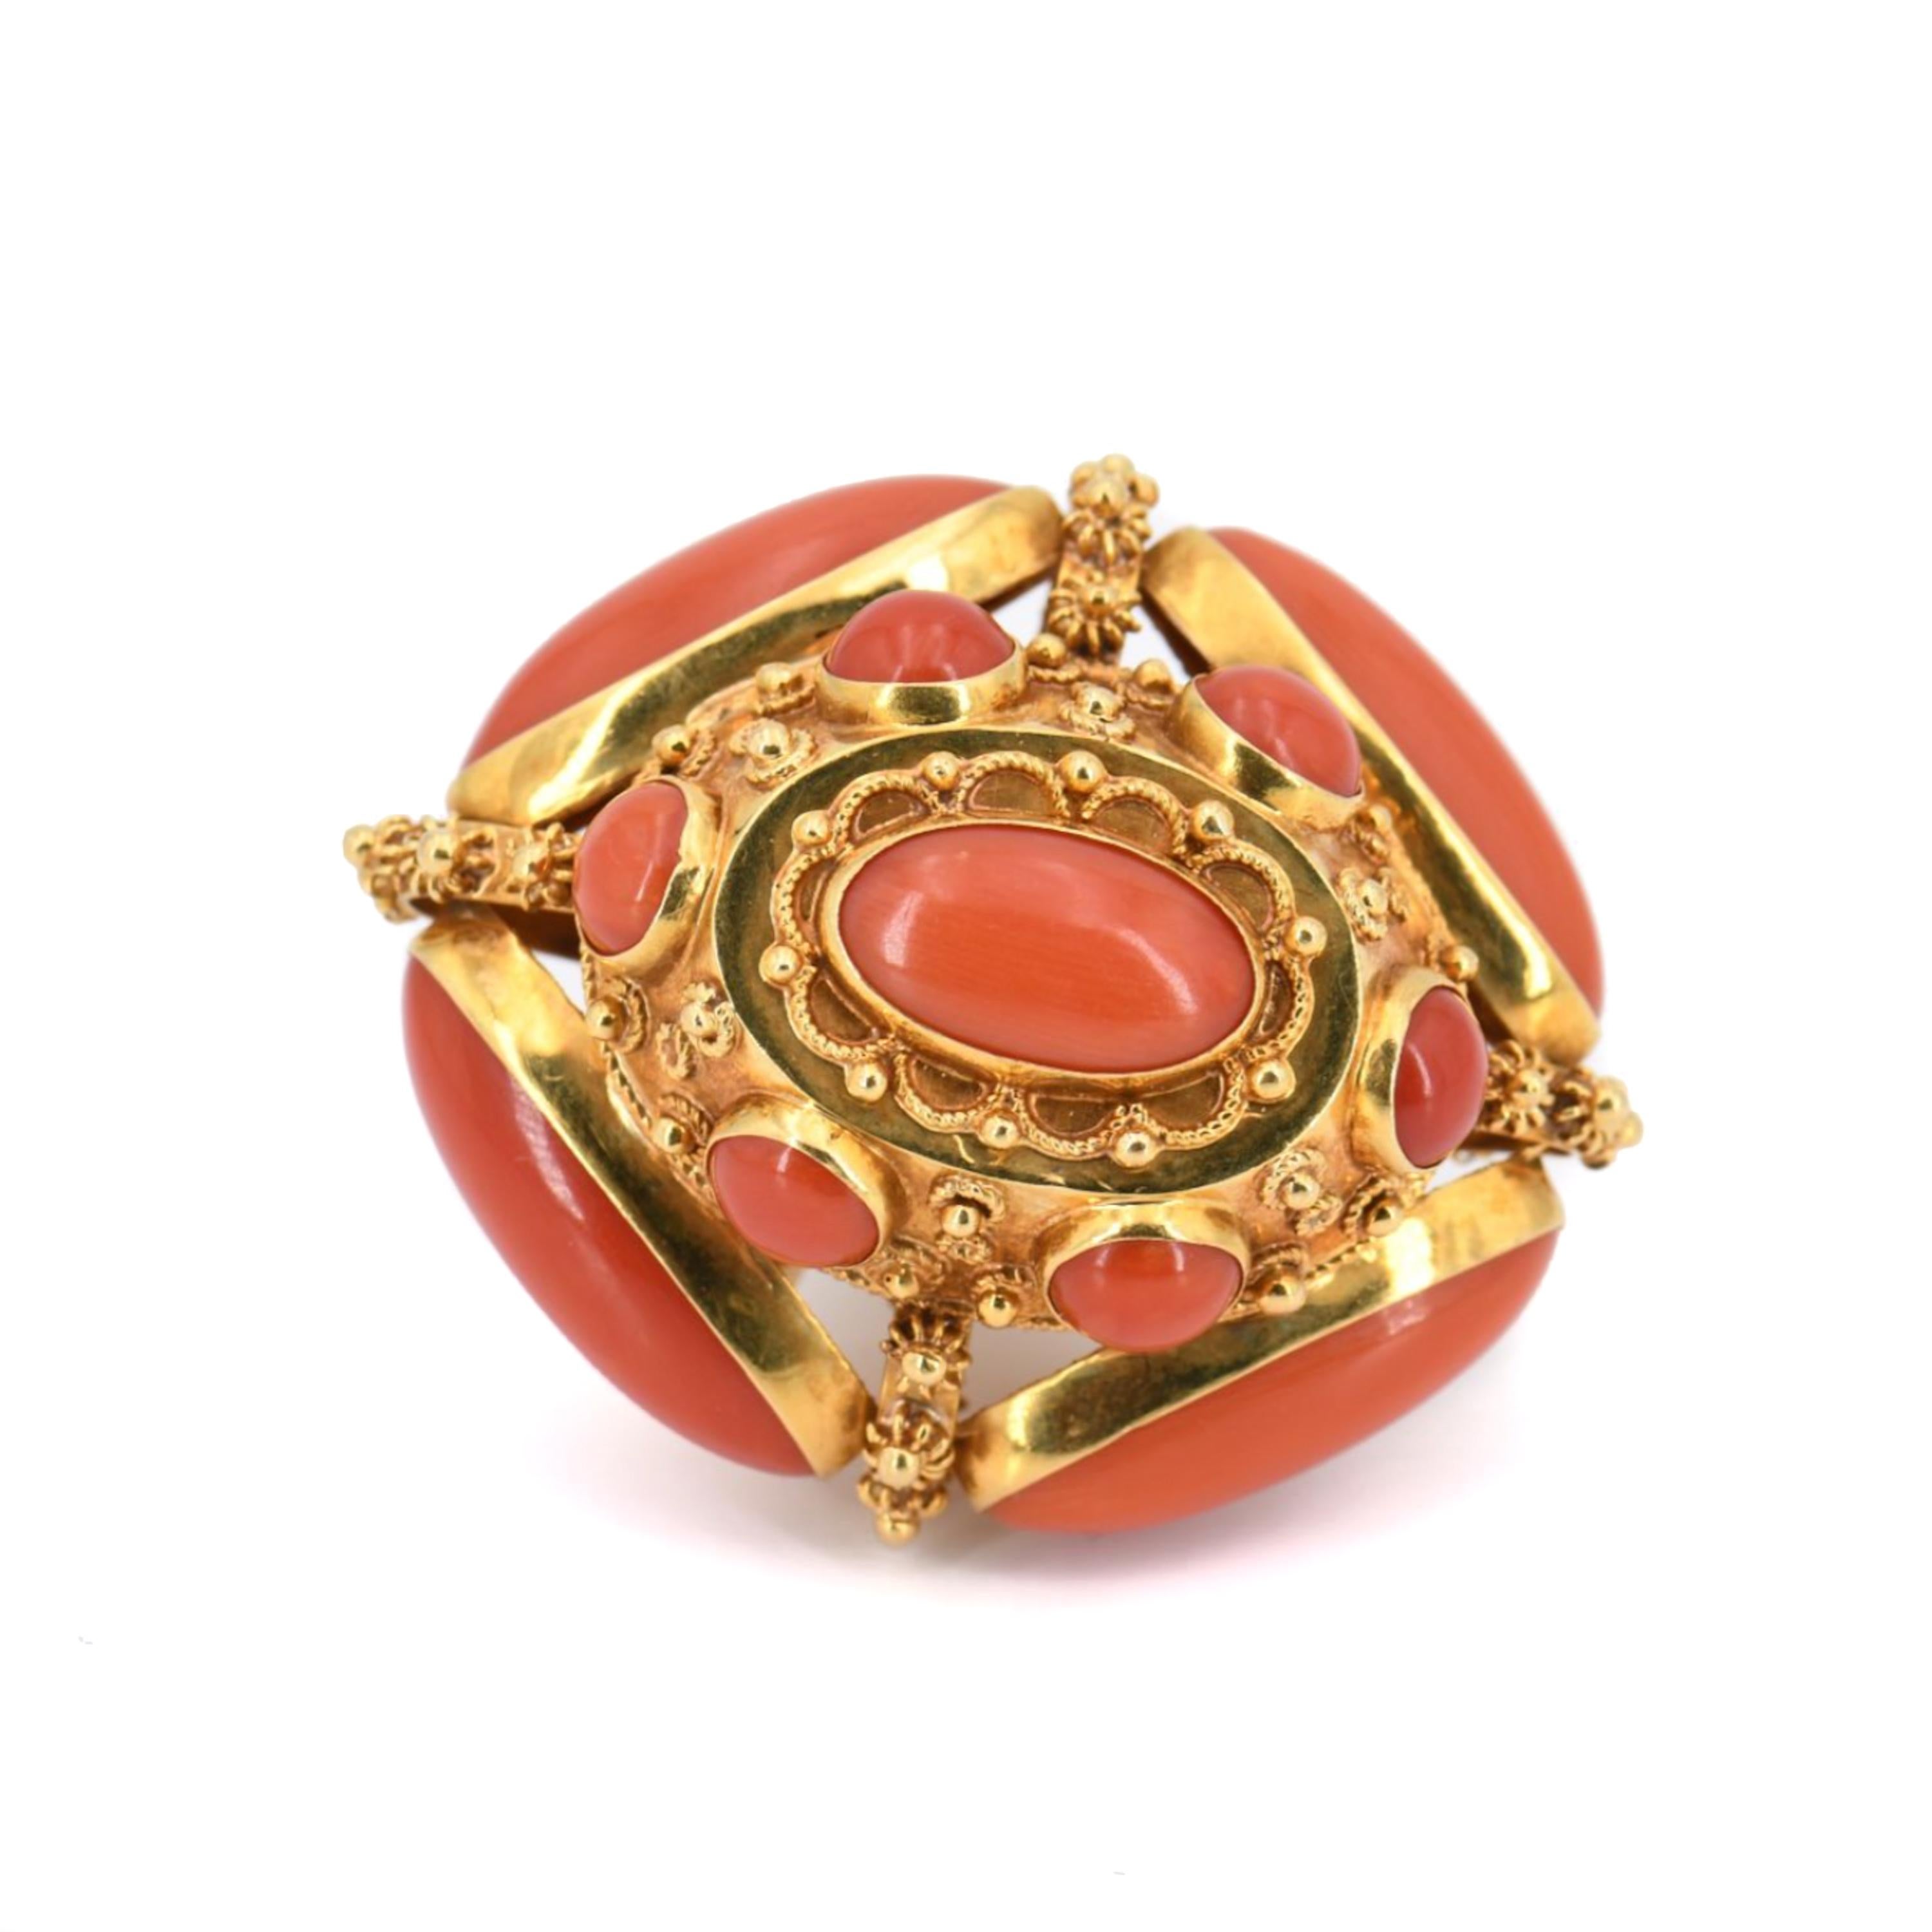 Etruscan Revival Venetian Revival Coral and Akoya Pearl 18K Gold Fob Charm Pendant